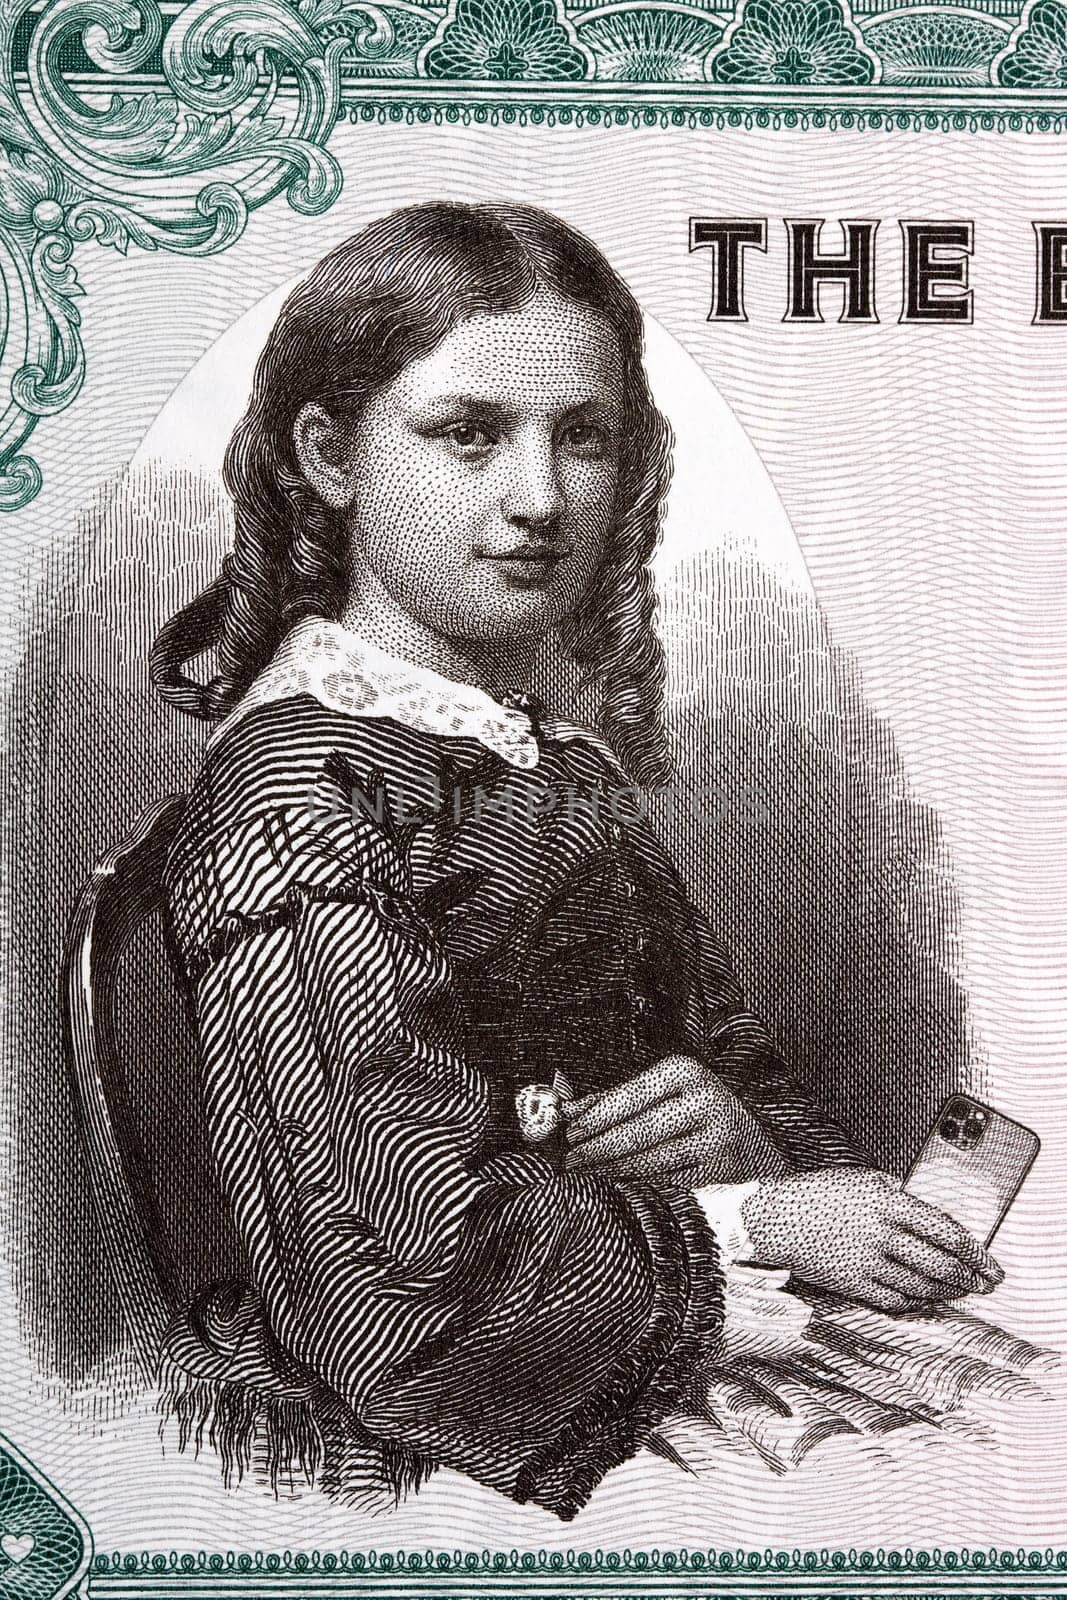 Girl with a mobile phone in her hand from money